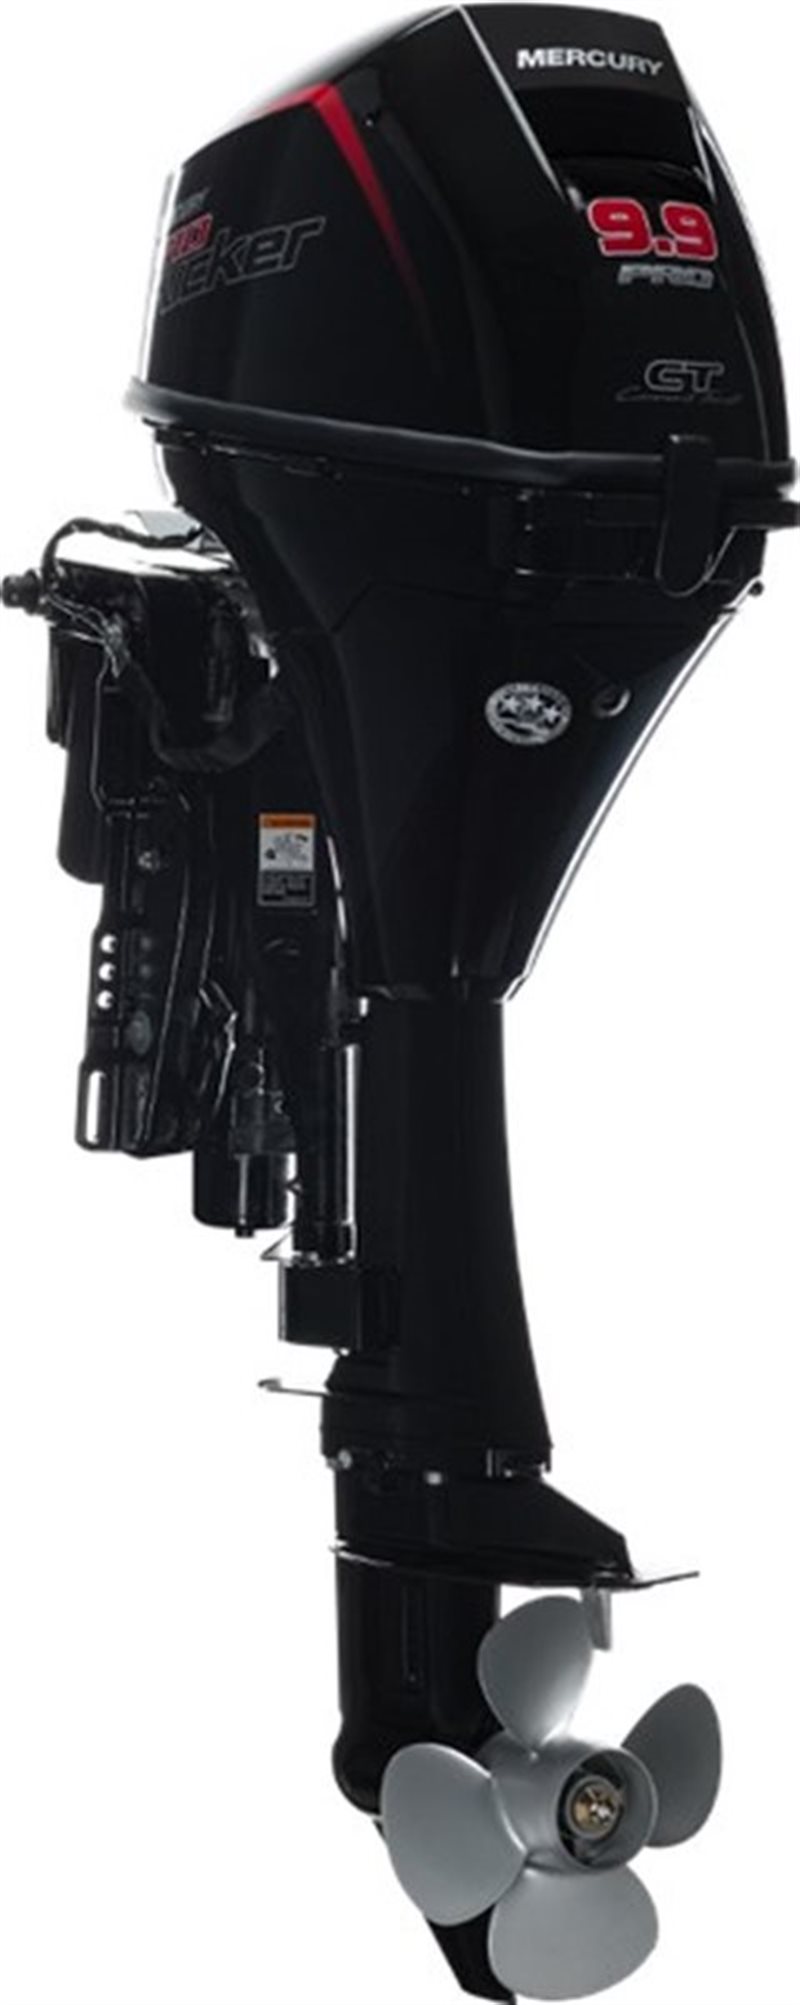 2020 Mercury Outboard FourStroke 8-9.9 hp 99 hp ProKicker at Fort Fremont Marine